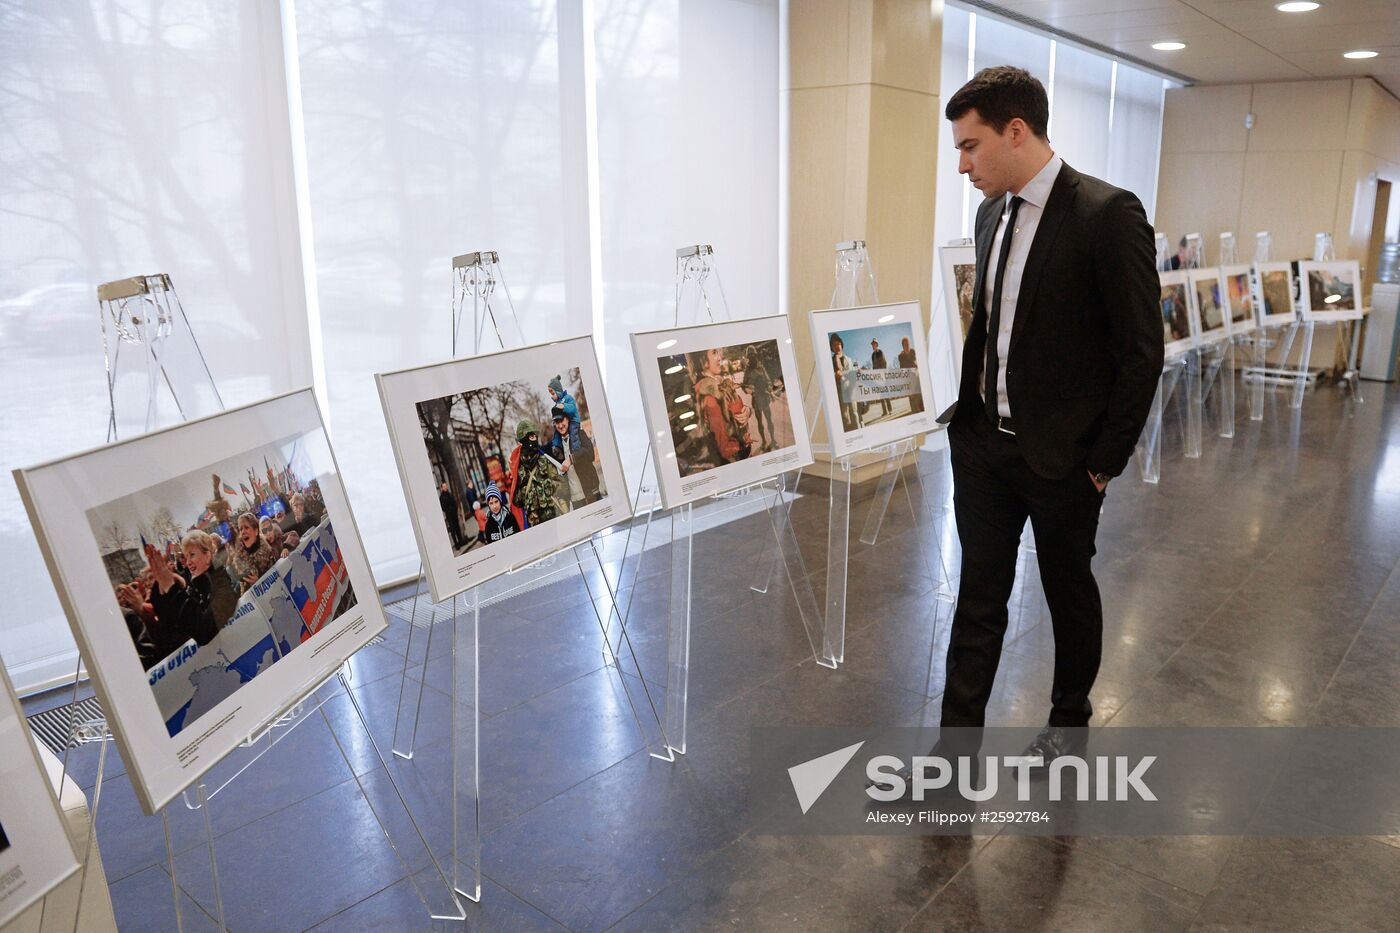 Photo exhibition on Russia-Crimea reunification opens in Moscow